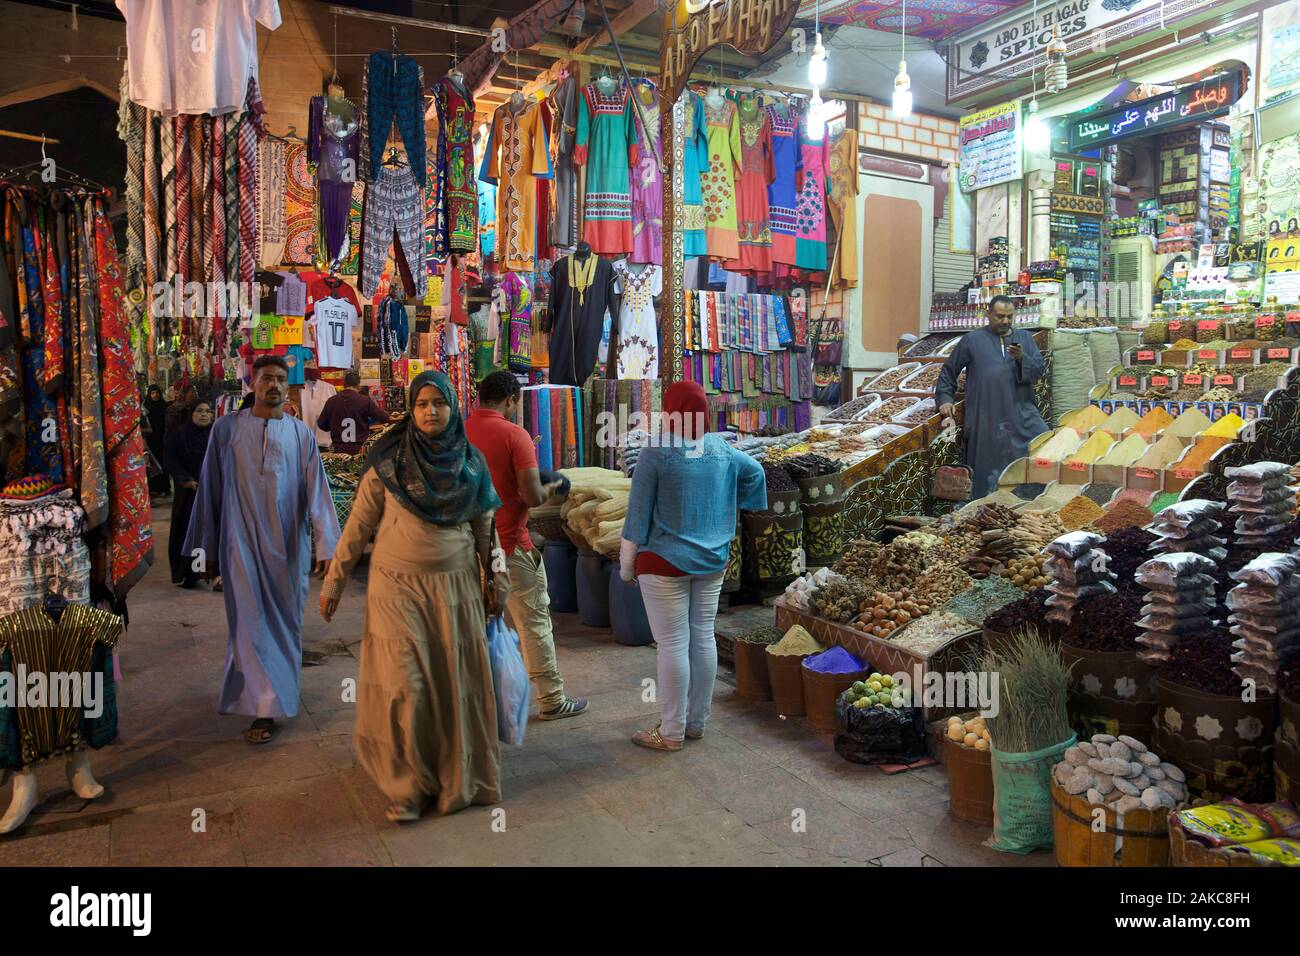 Egypt, Upper Egypt, Aswan, Egyptians wandering between stands of spices and colorful clothes in a covered alley of the souk Stock Photo